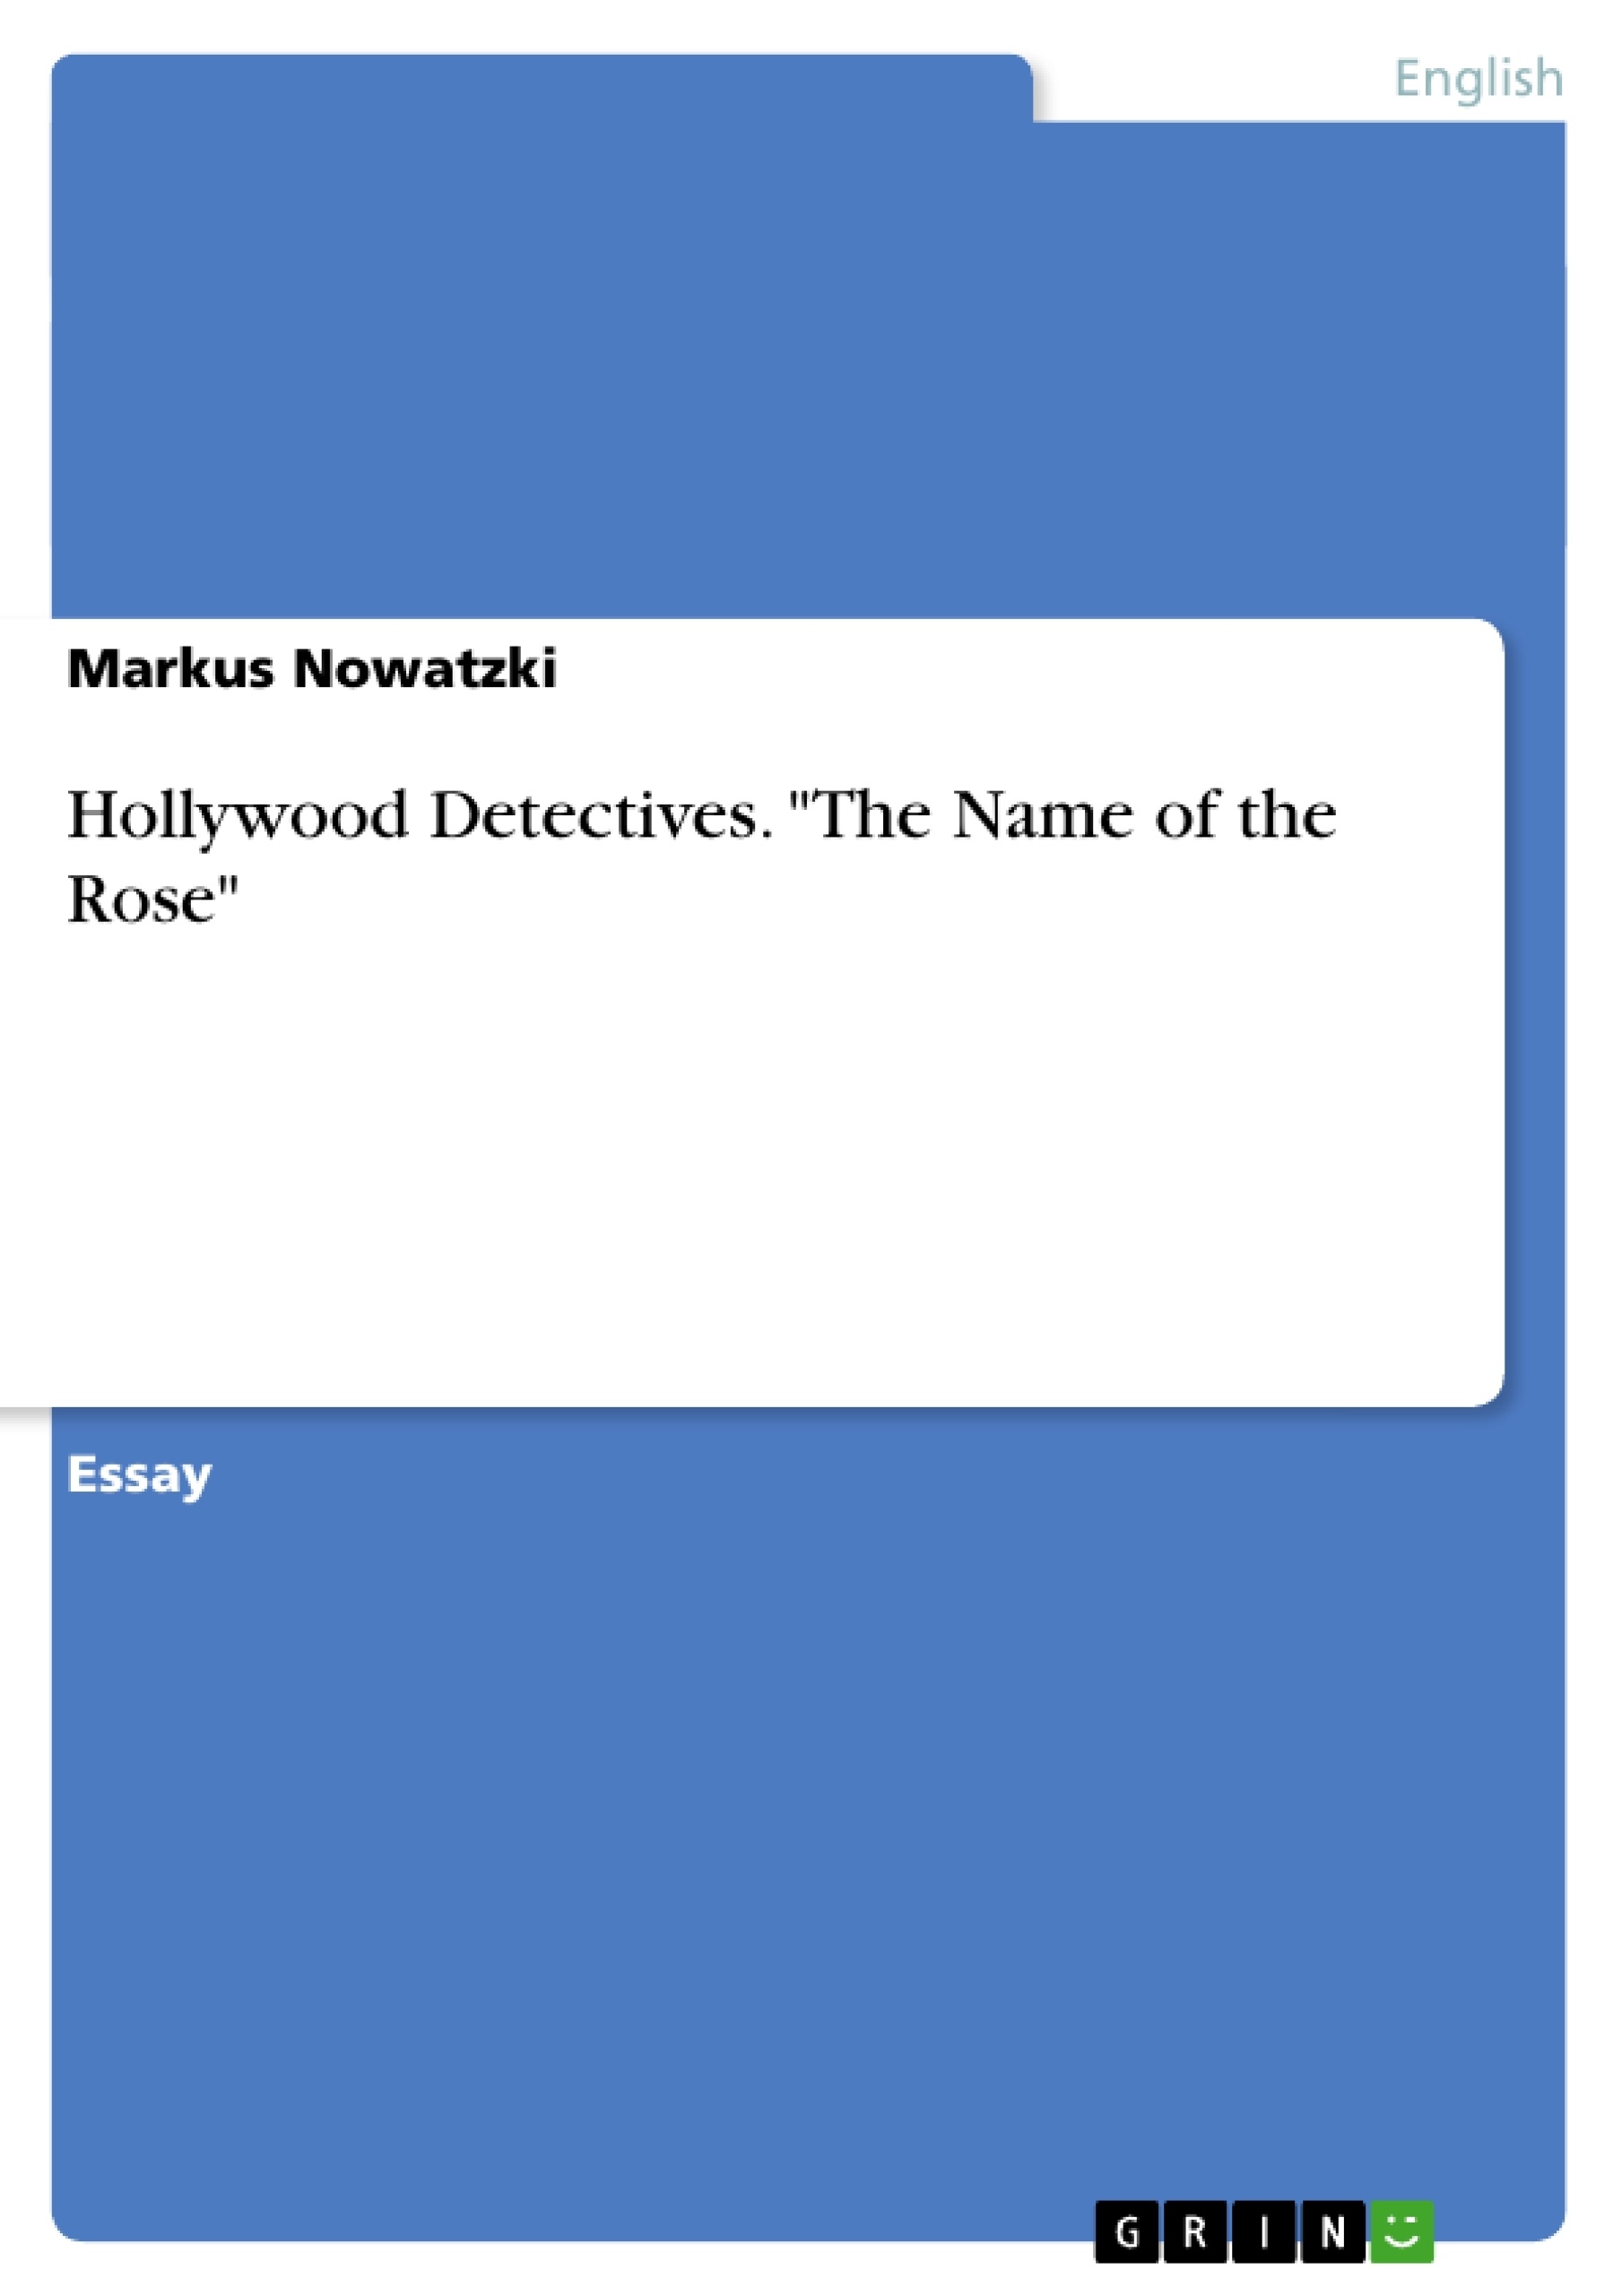 Titre: Hollywood Detectives. "The Name of the Rose"